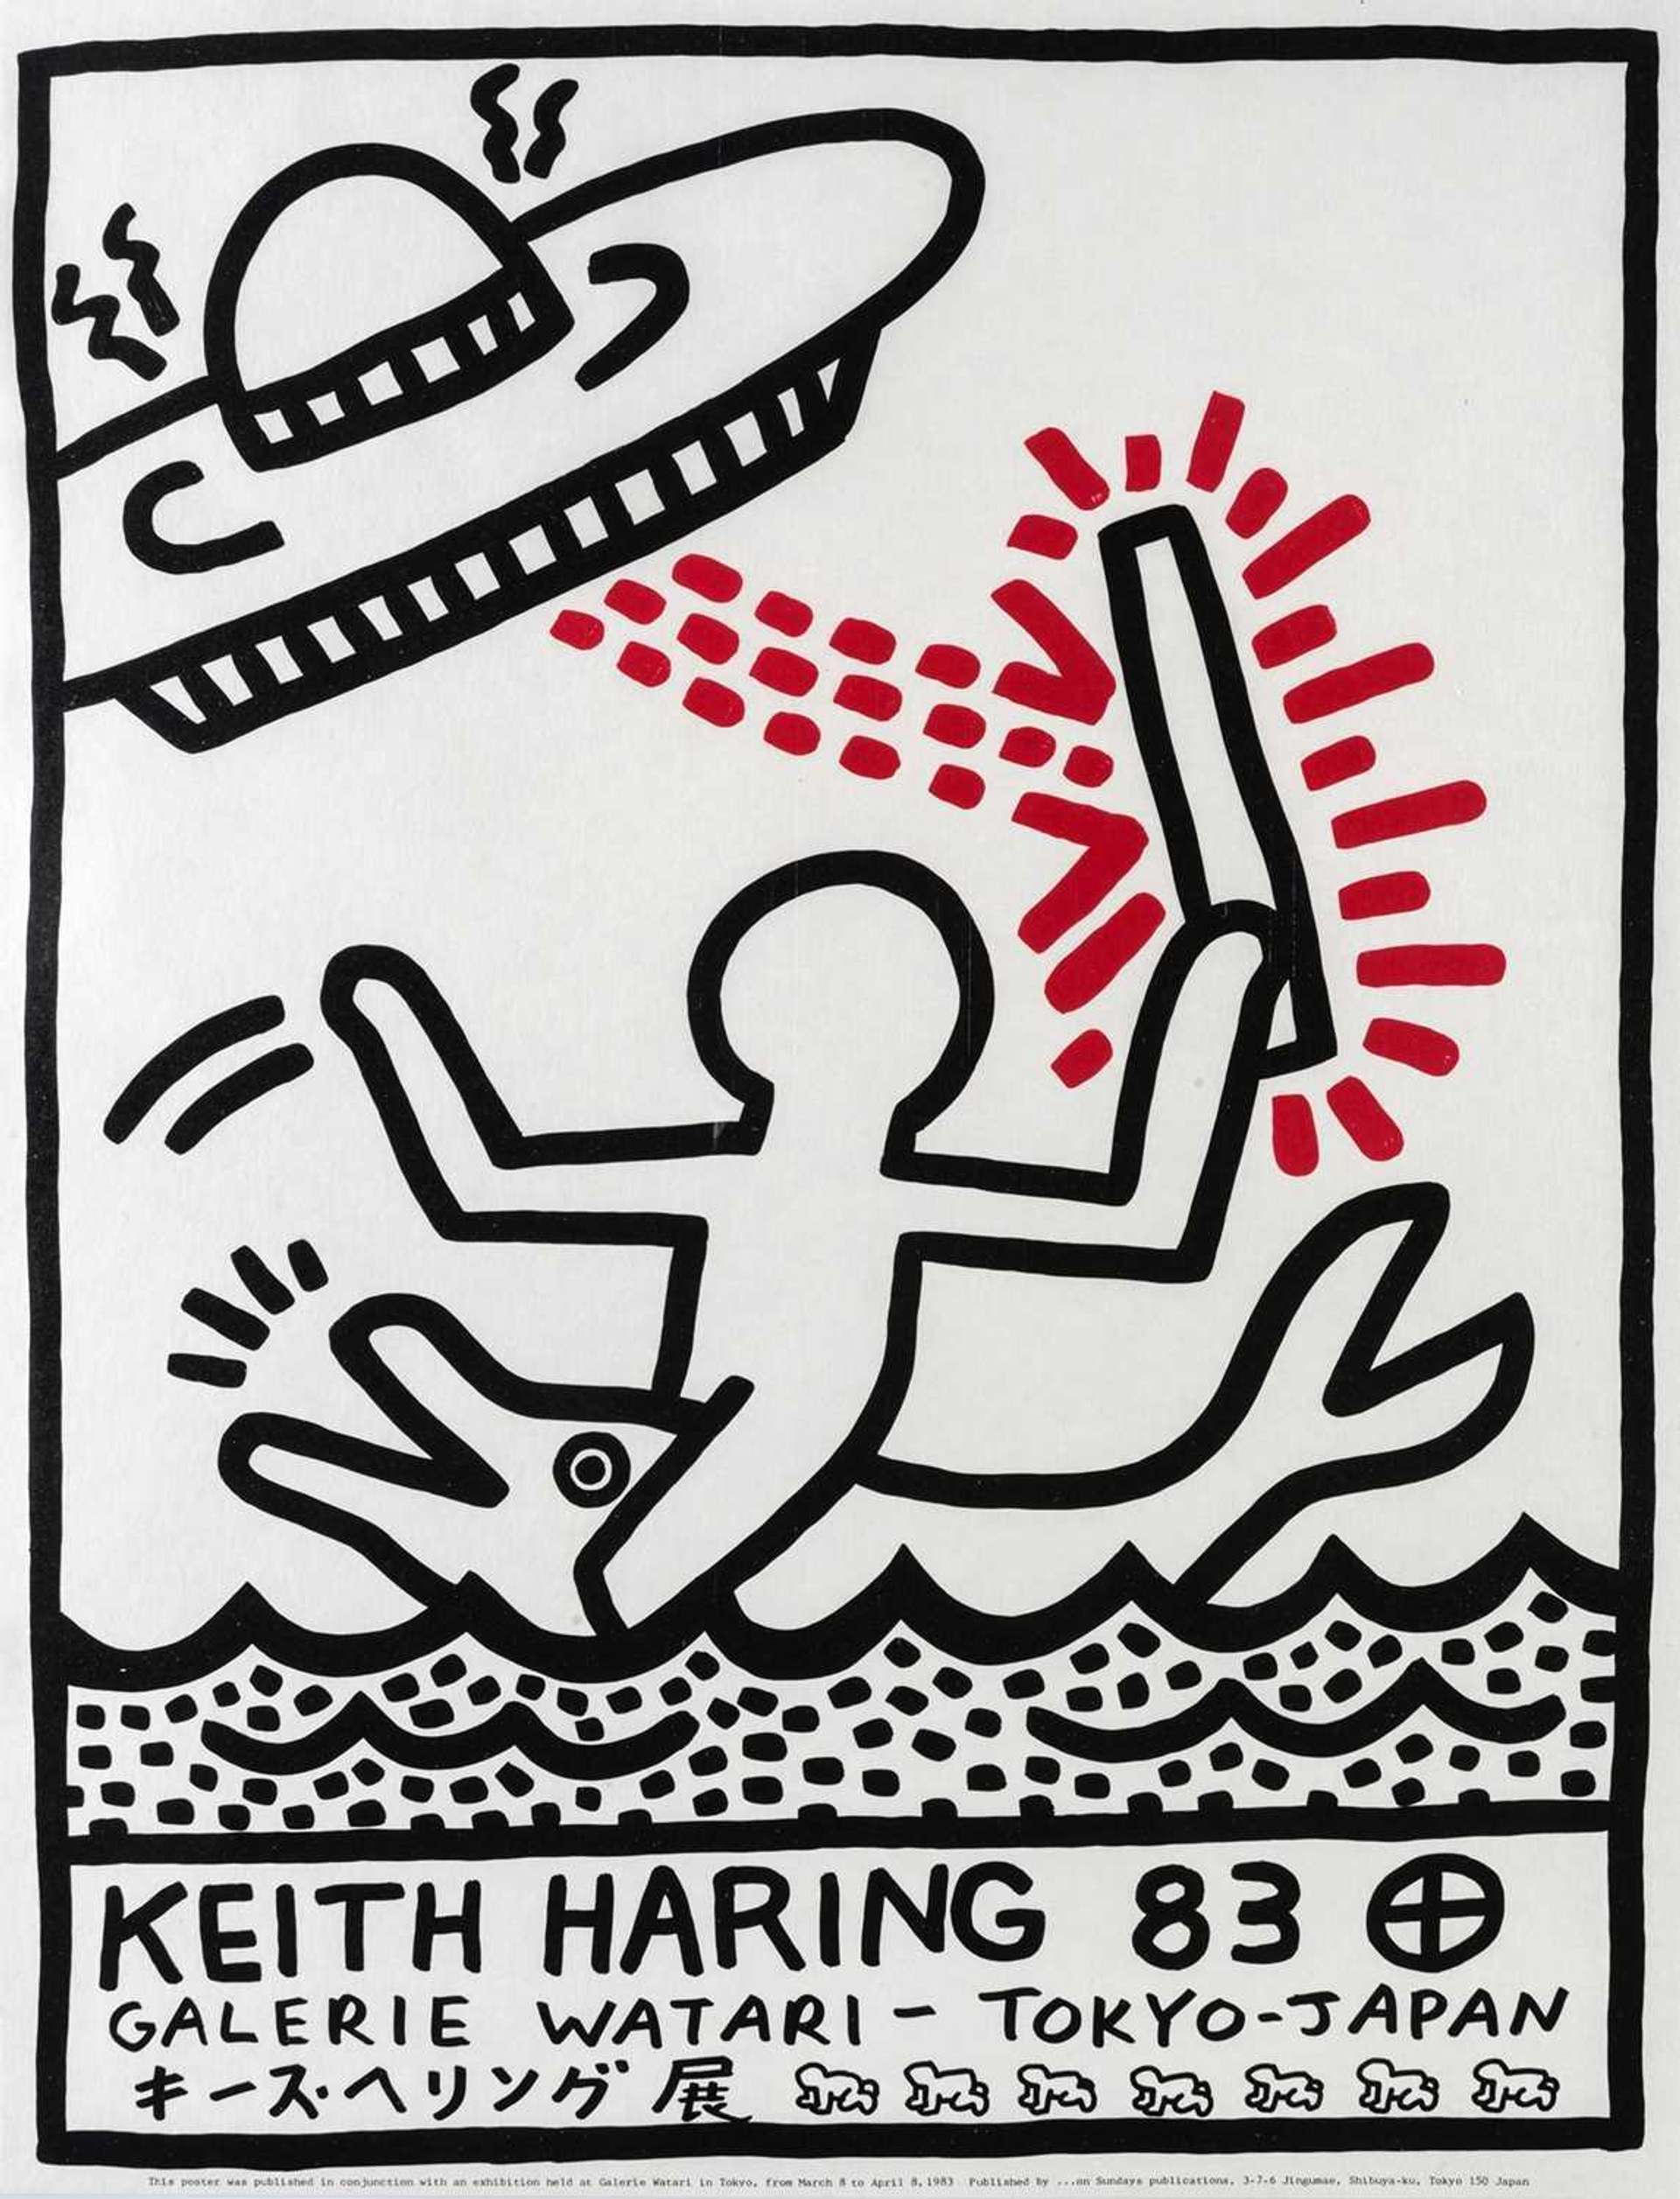 Keith Haring: Galerie Watari Exhibtion Tokyo Poster - Unsigned Print